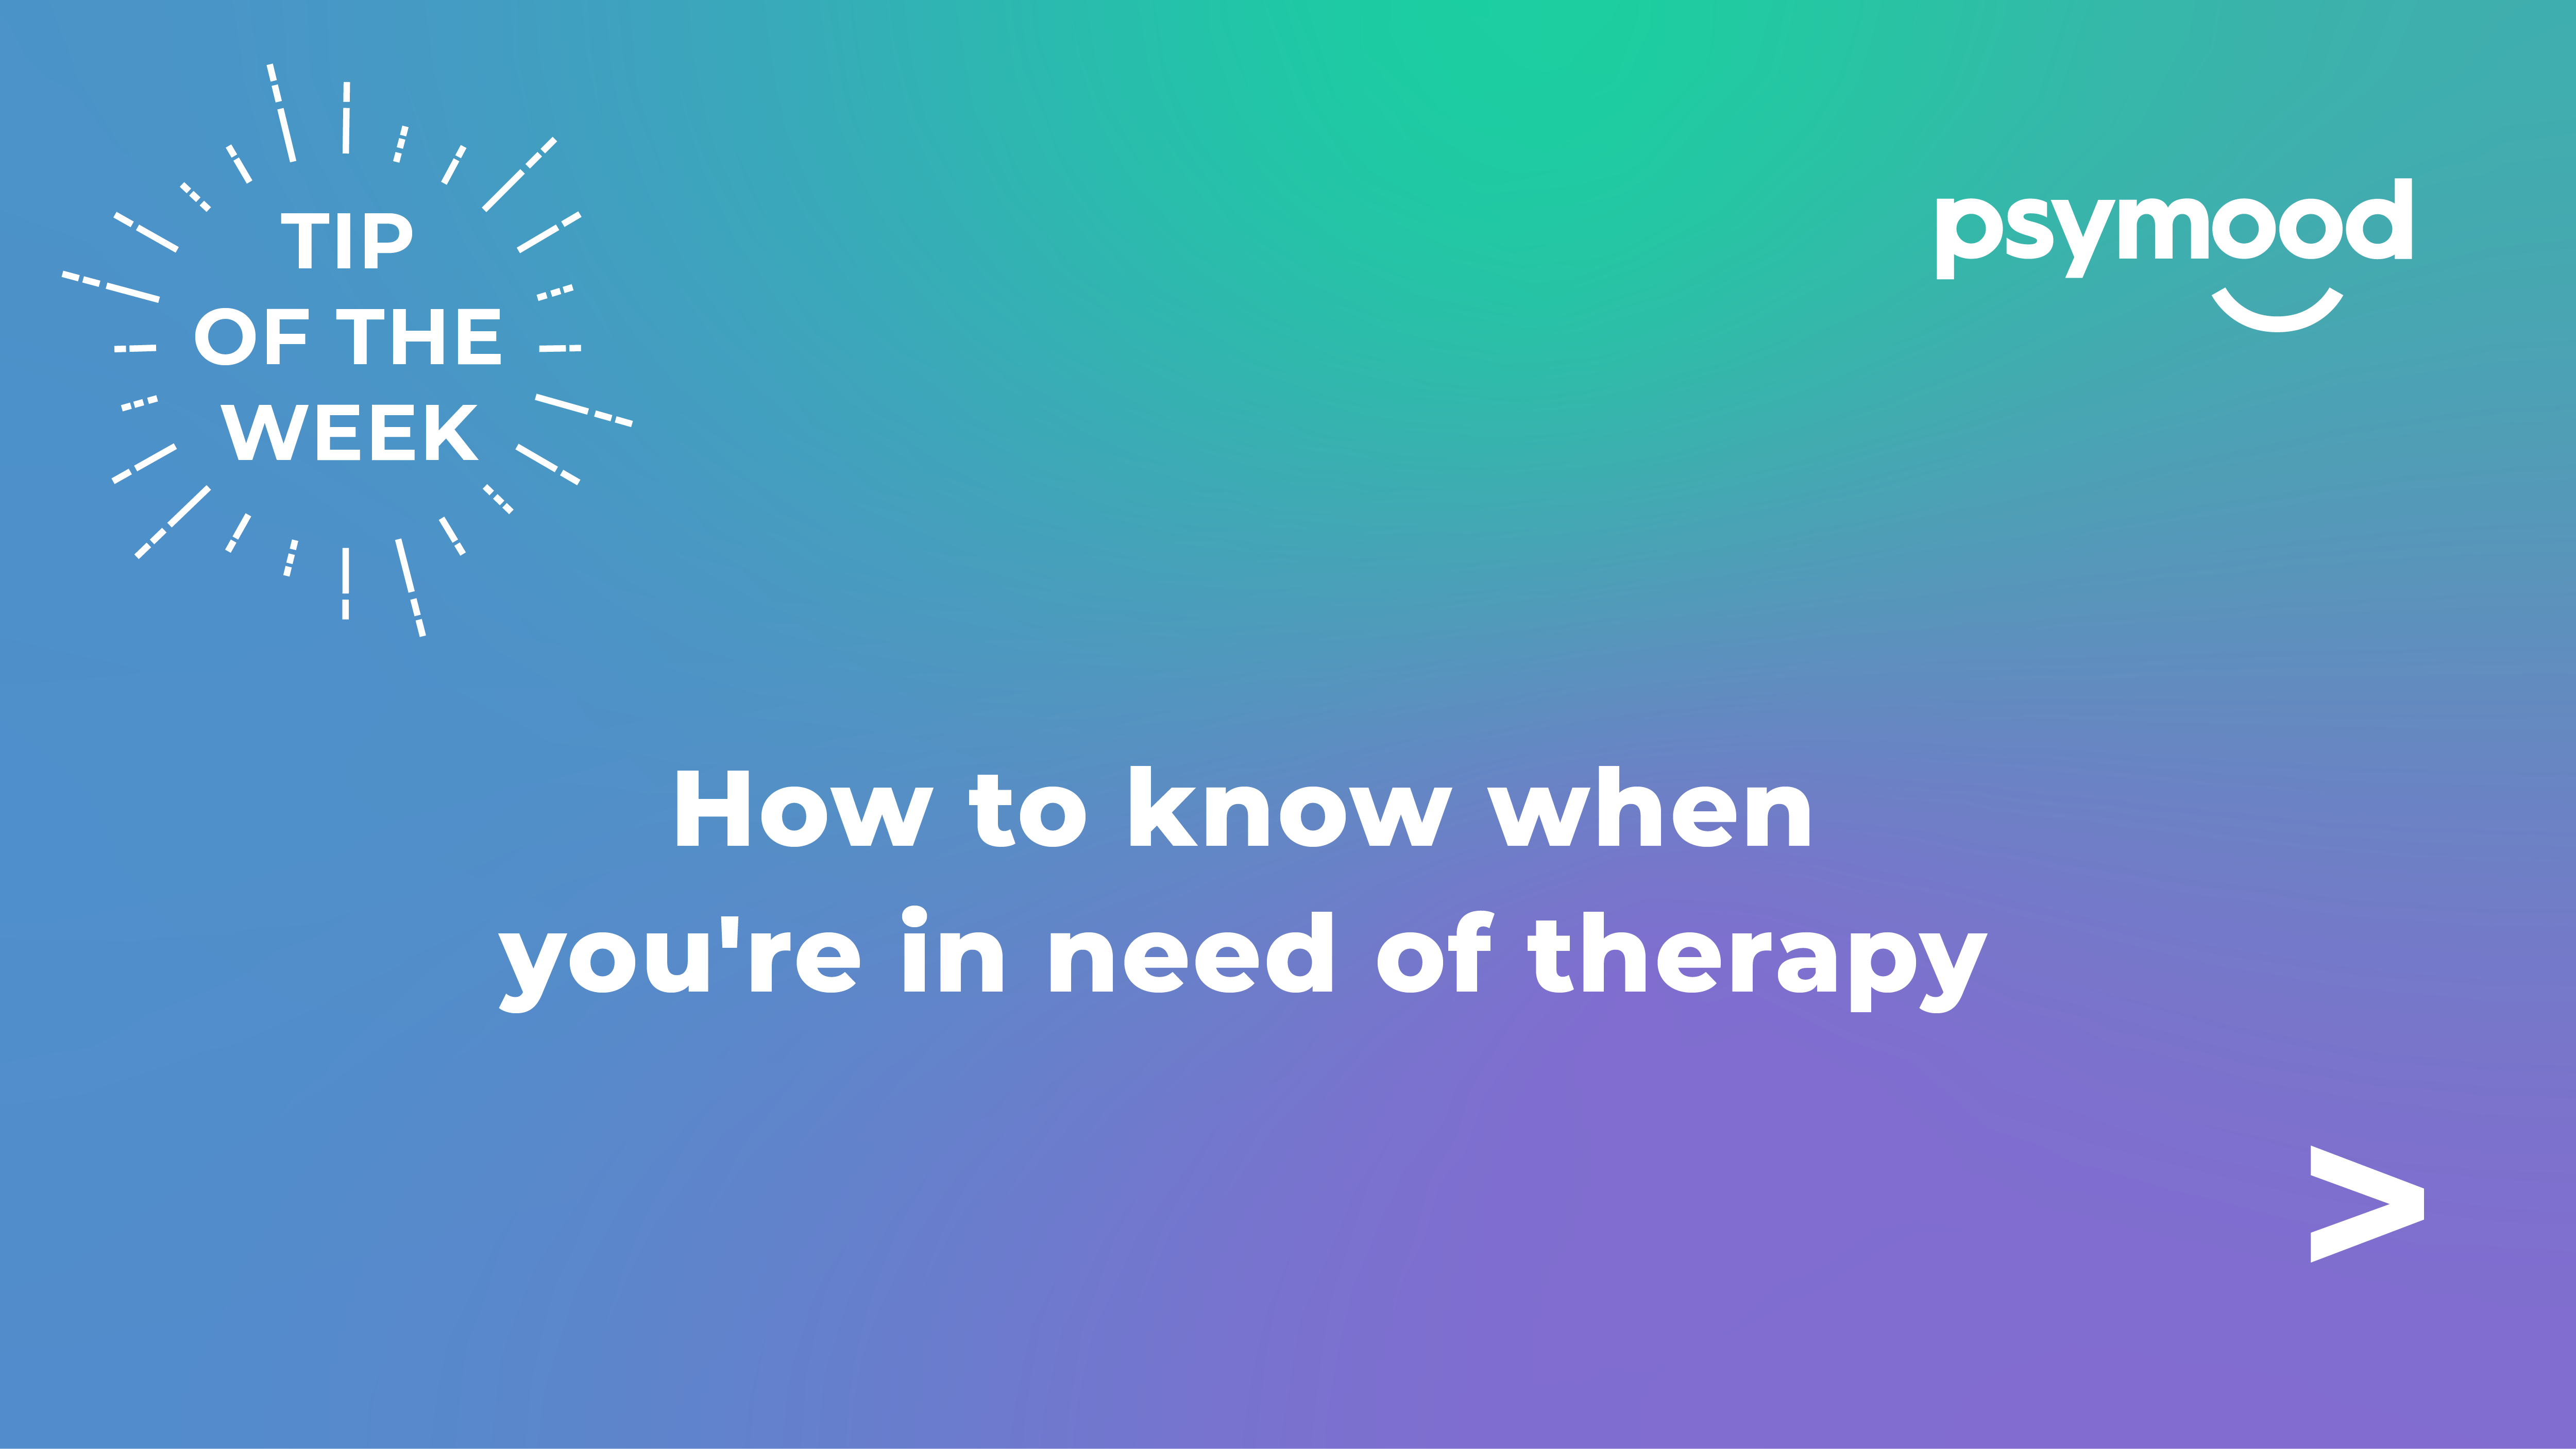 How to know when you’re in need of therapy